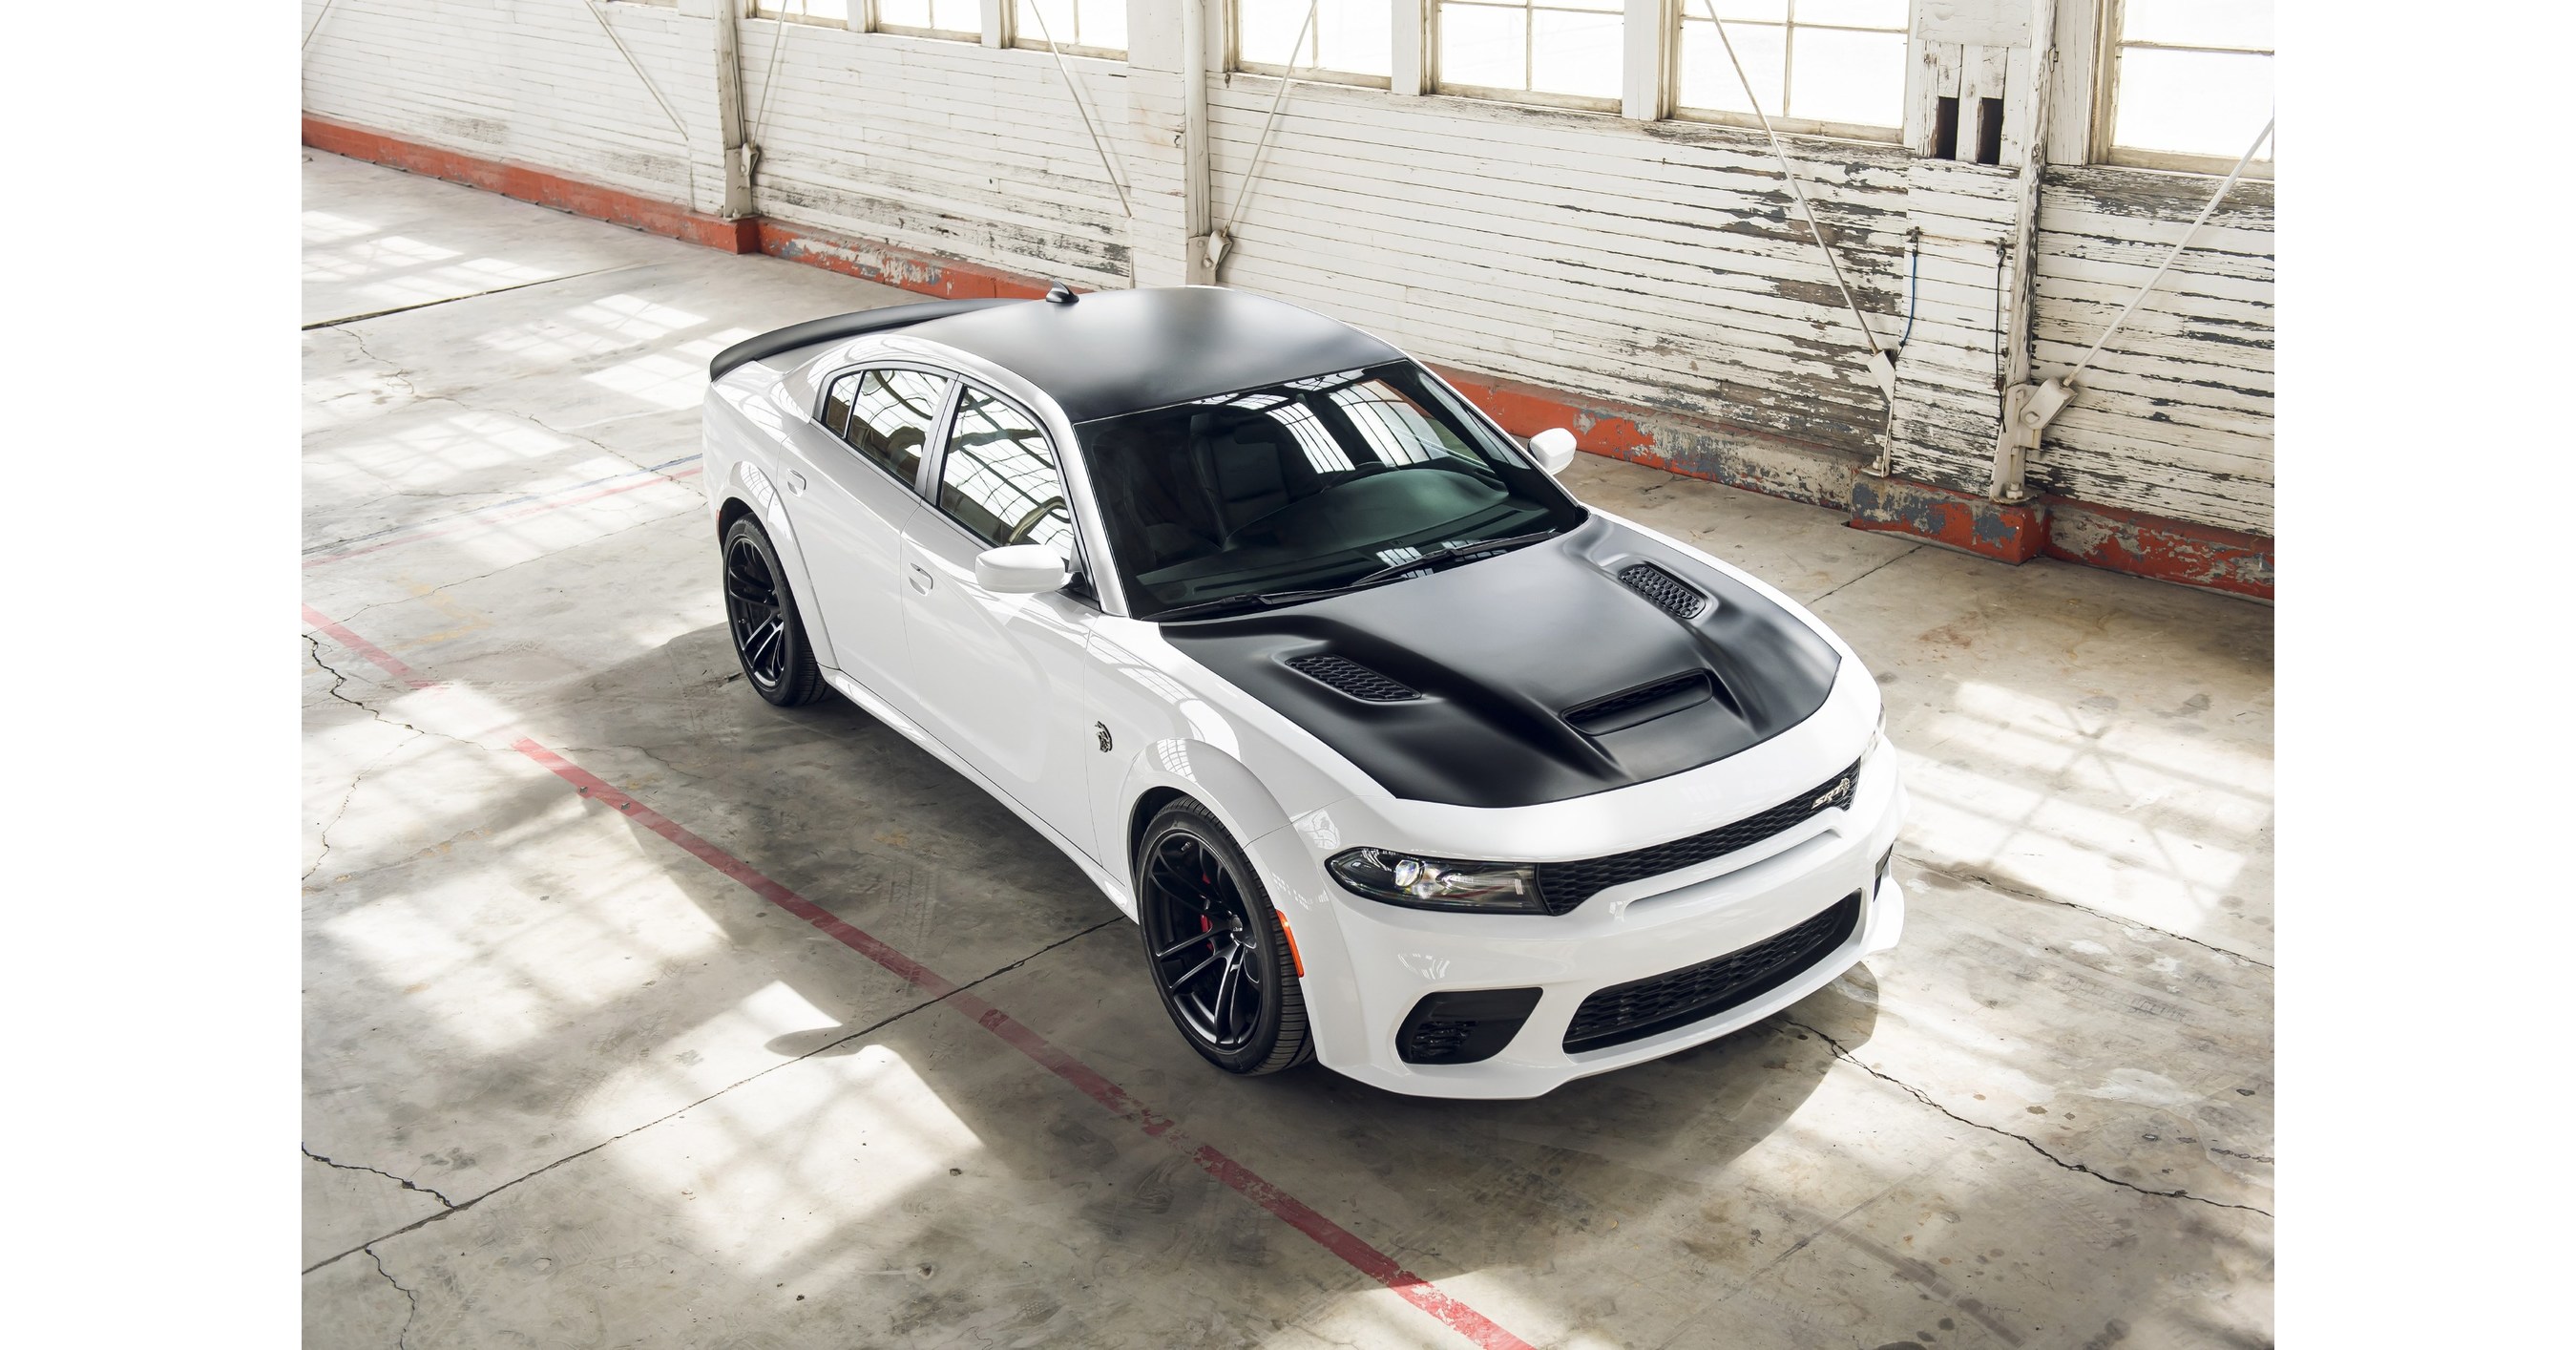 Dodge Announces Pricing for 2021 Dodge Charger Model Lineup